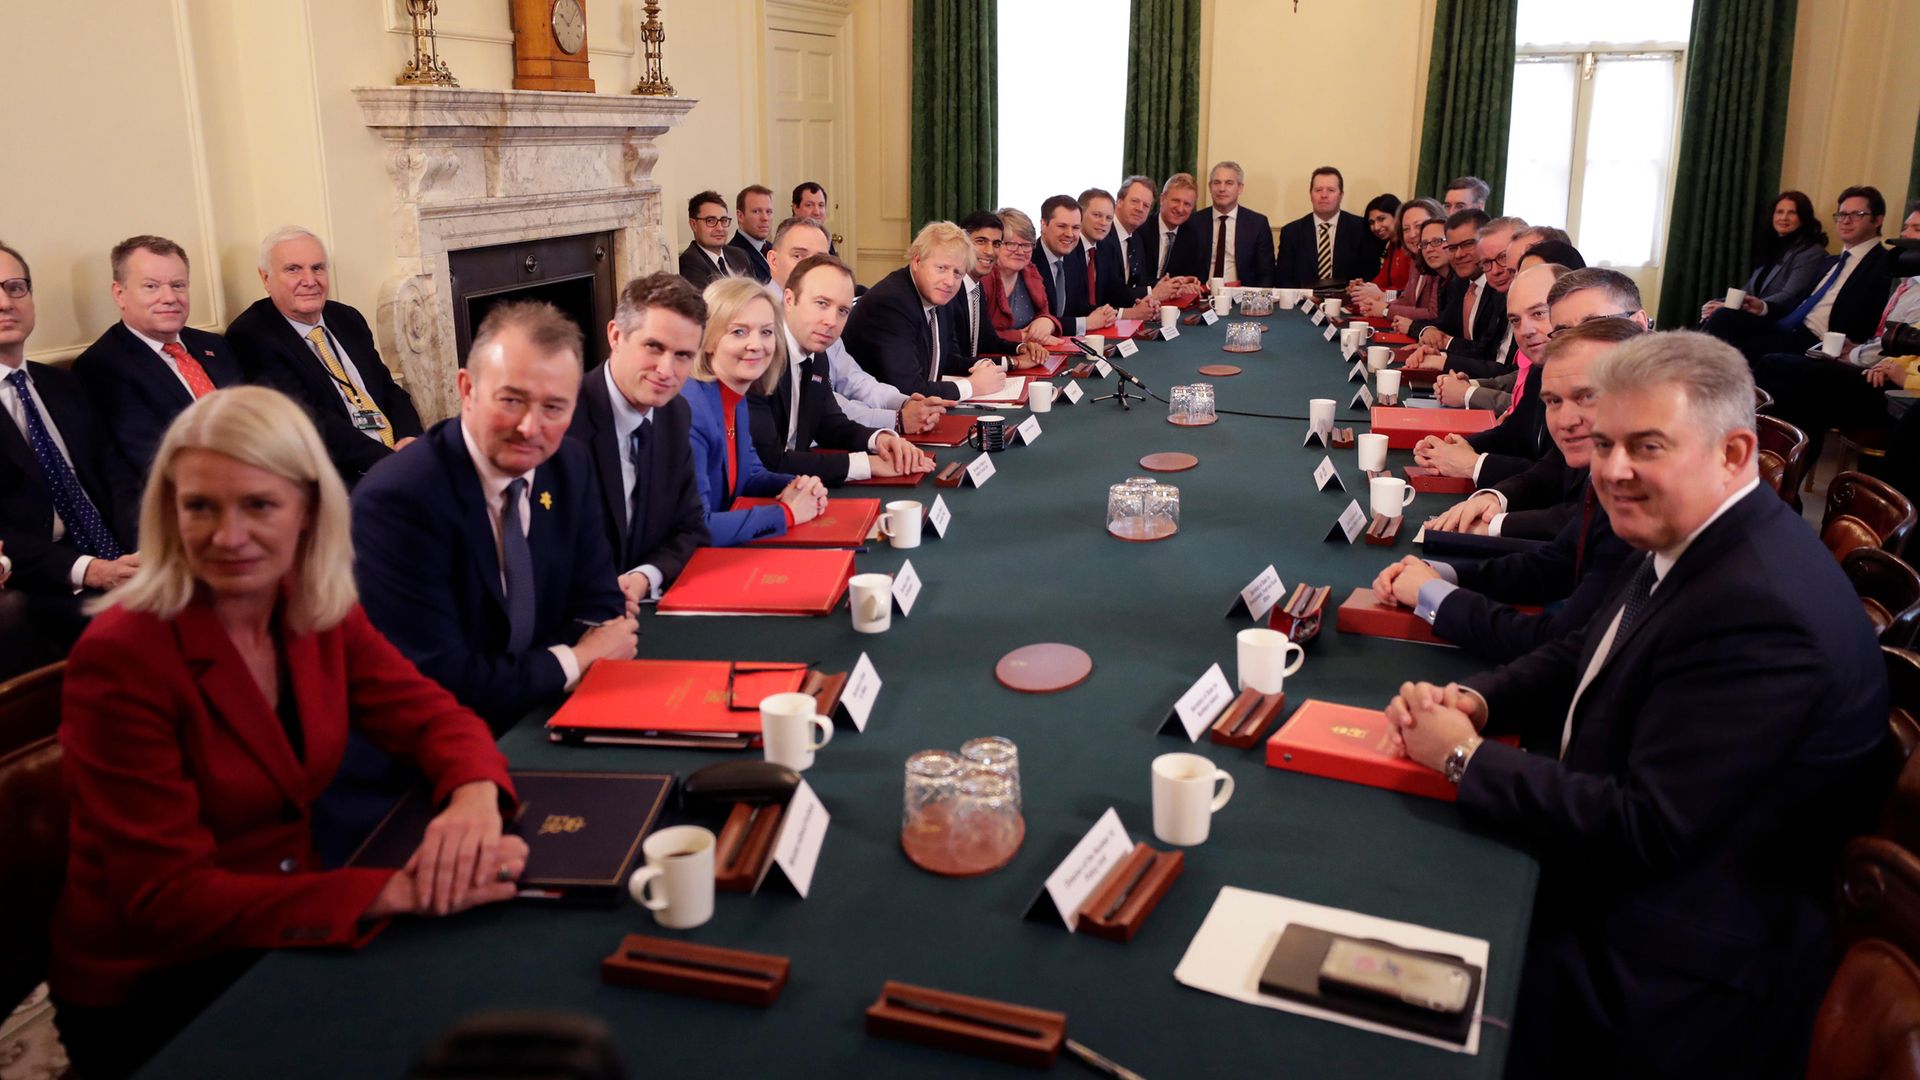 Prime Minister Boris Johnson presides over cabinet meeting at 10 Downing Street - Credit: PA